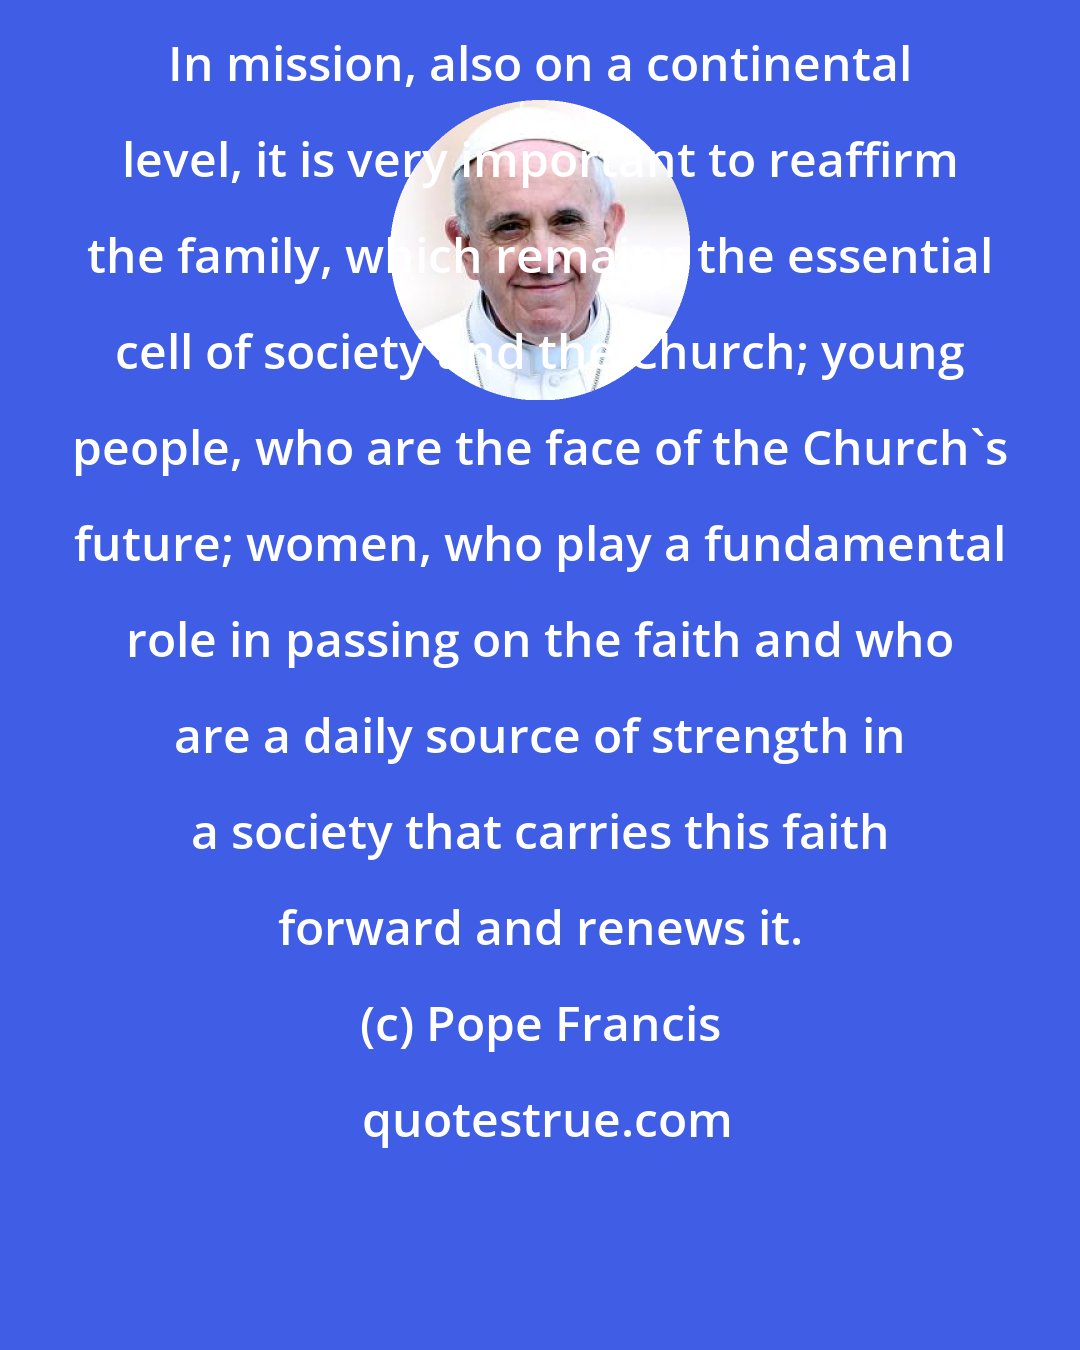 Pope Francis: In mission, also on a continental level, it is very important to reaffirm the family, which remains the essential cell of society and the Church; young people, who are the face of the Church's future; women, who play a fundamental role in passing on the faith and who are a daily source of strength in a society that carries this faith forward and renews it.